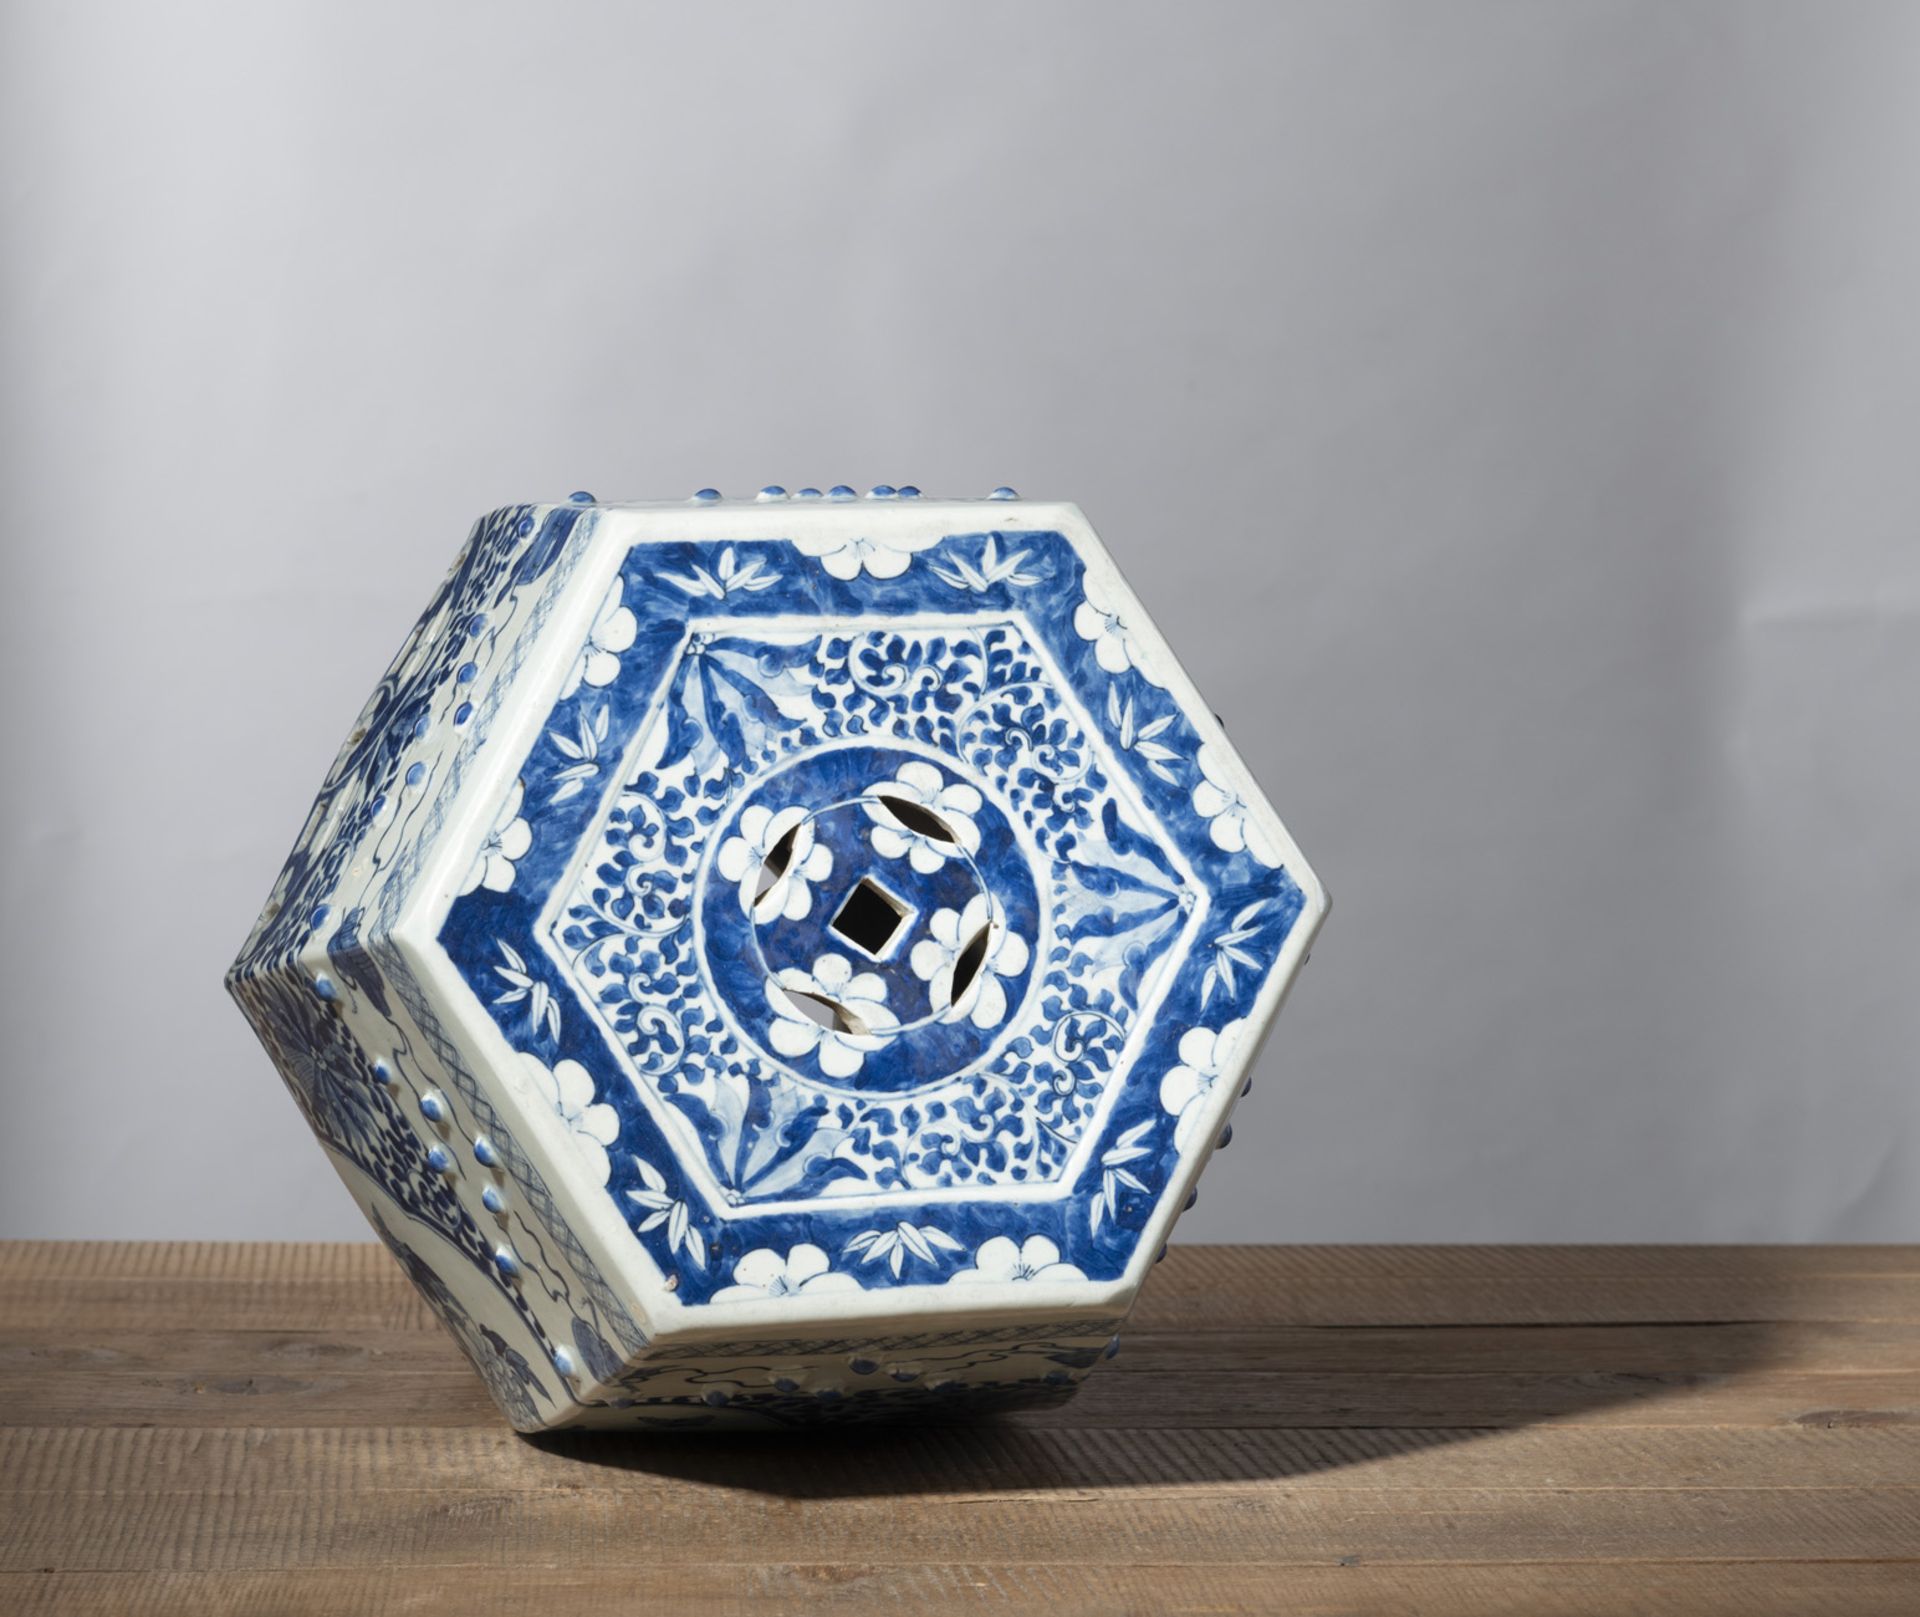 A HEXAGONAL BLUE AND WHITE PORCELAIN GARDEN STOOL WITH CASH COINS, FLOWERS AND LUCKY SYMBOLS DECORA - Image 3 of 4